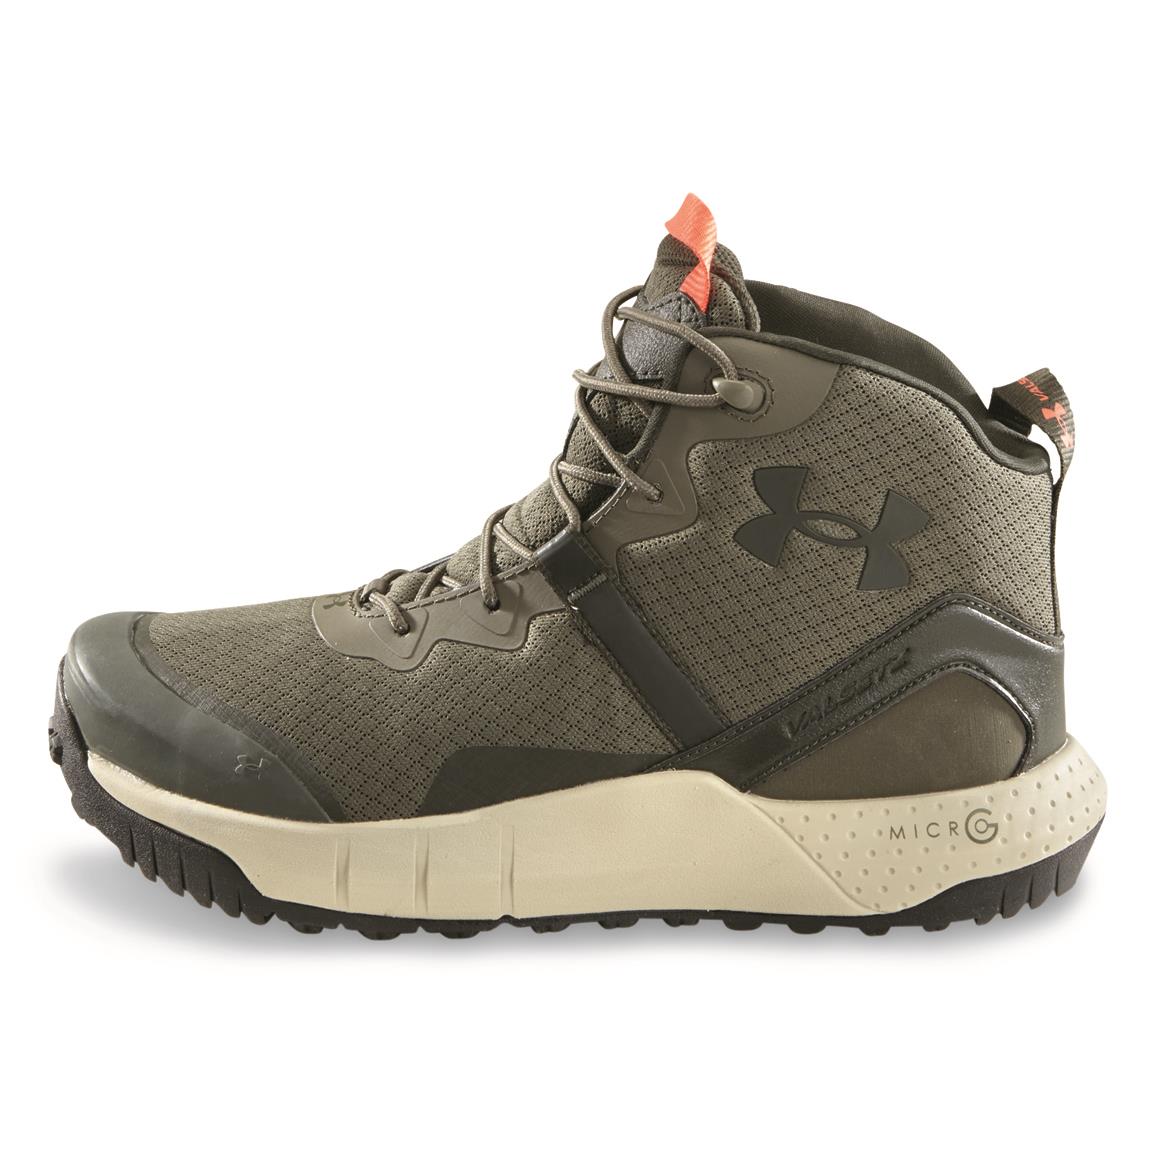 Under Armour Shoes | Sportsman's Guide